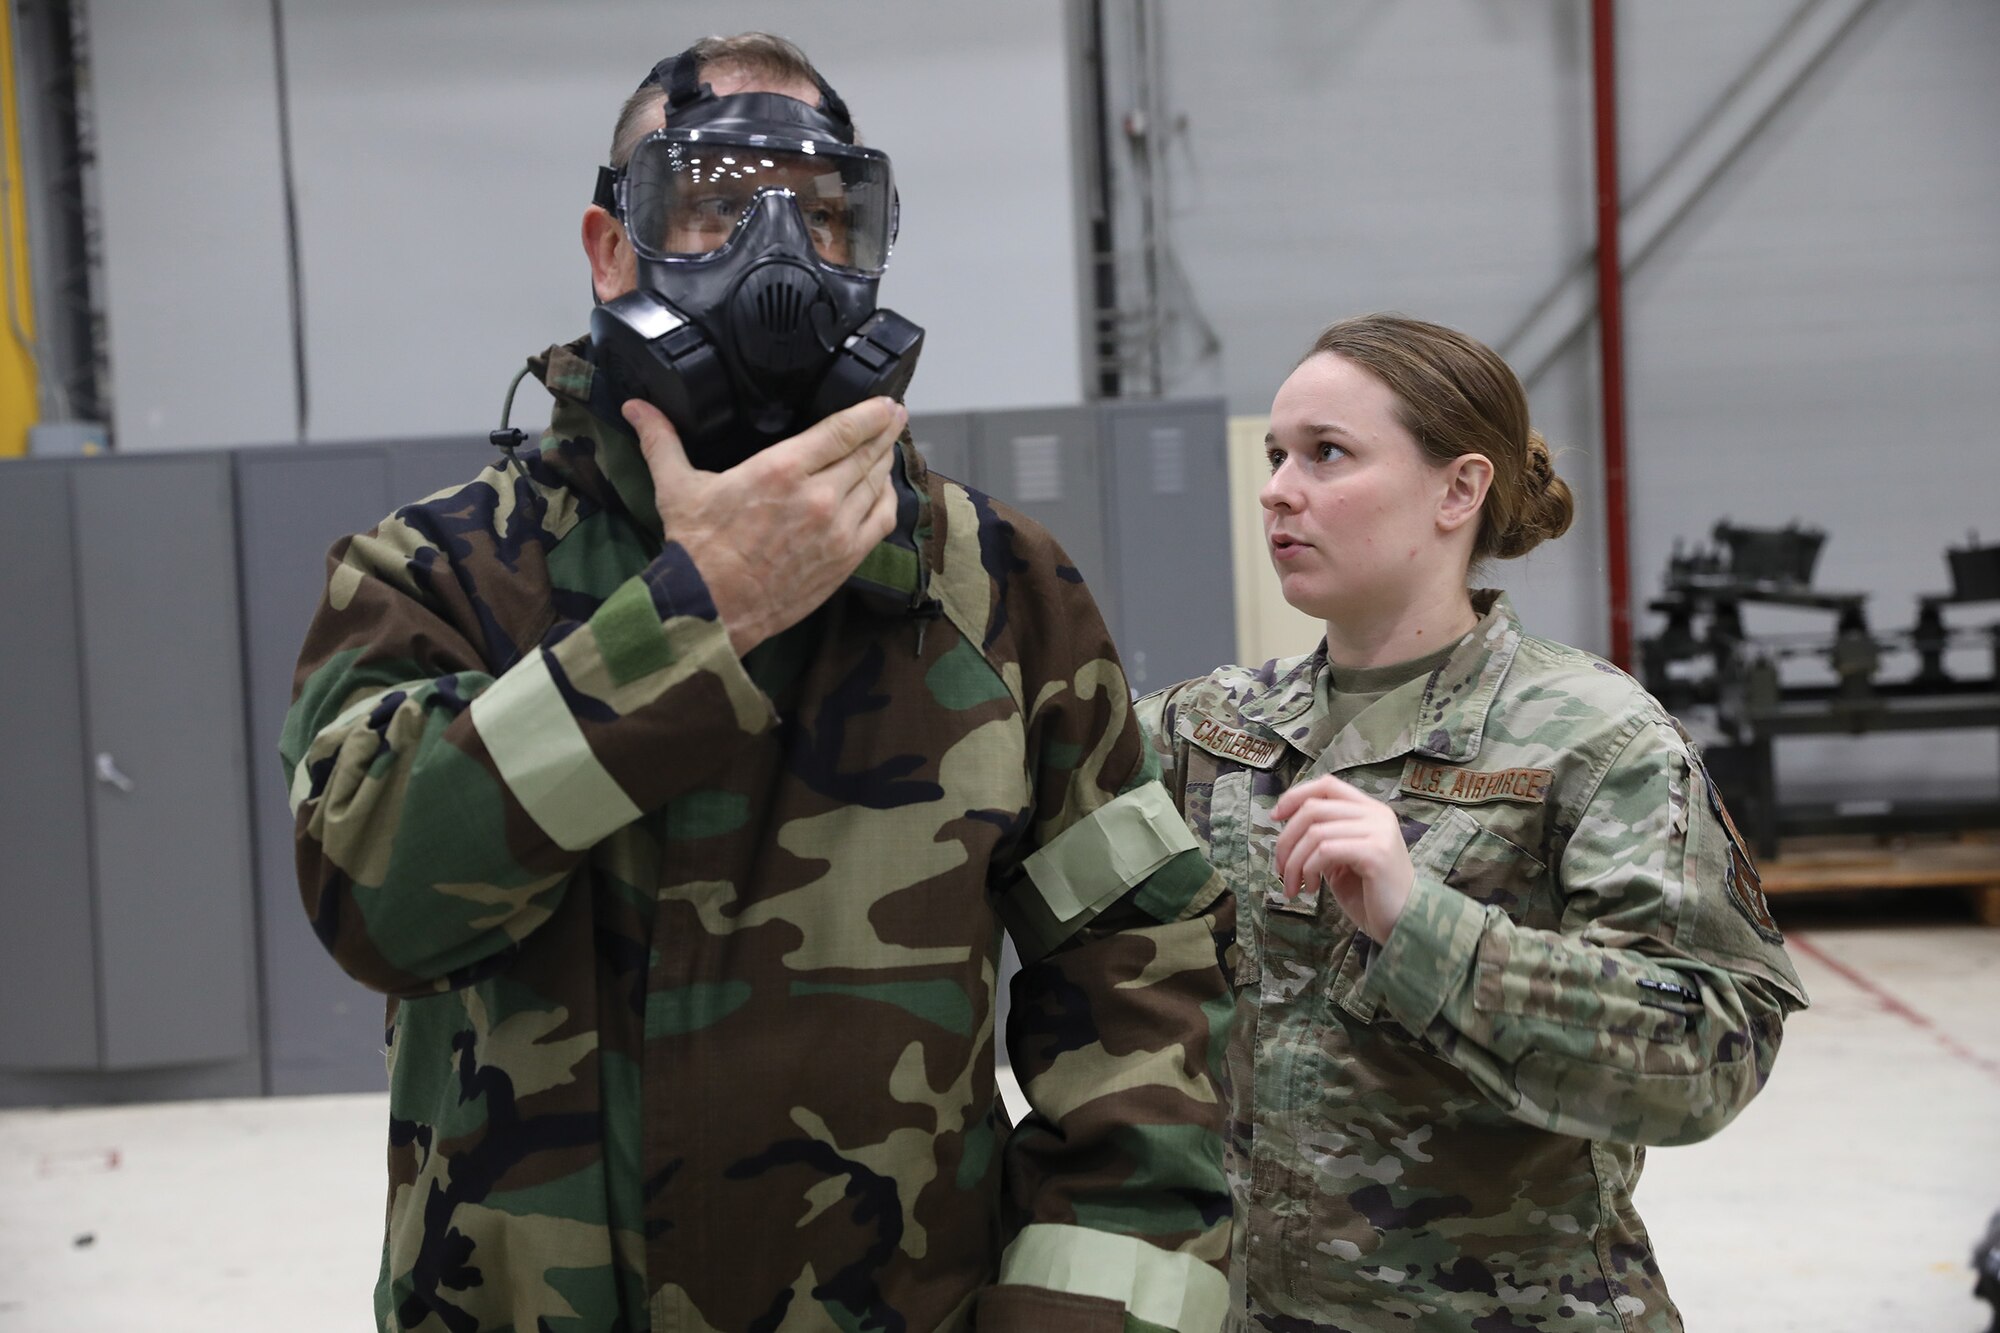 Staff Sgt. Chelsea Castleberry, 445th Civil Engineer Squadron emergency management apprentice, helps an employer don his Mission Oriented Protective Posture (M.O.P.P.) gear during the 445th Airlift Wing Employer Appreciation Day, Nov. 5, 2022. (U.S. Air Force photo/Senior Airman Angela Jackson)